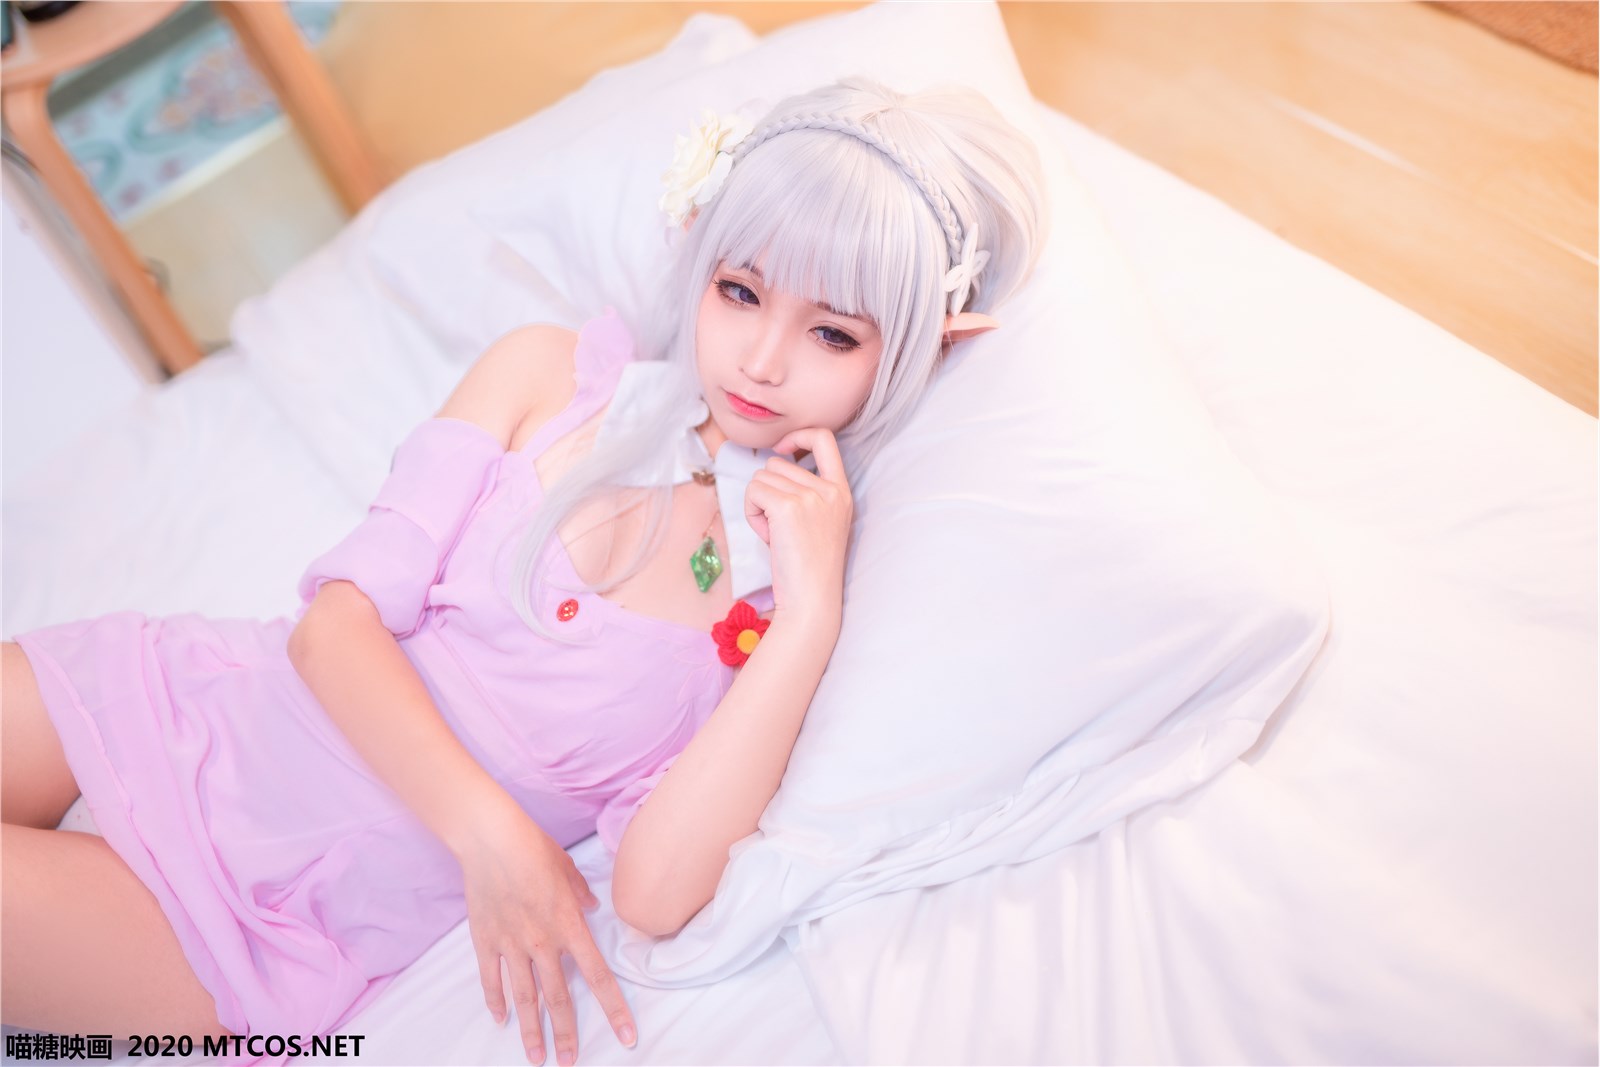 Meow candy picture Vol.118 foam off shoulder Nightgown(6)